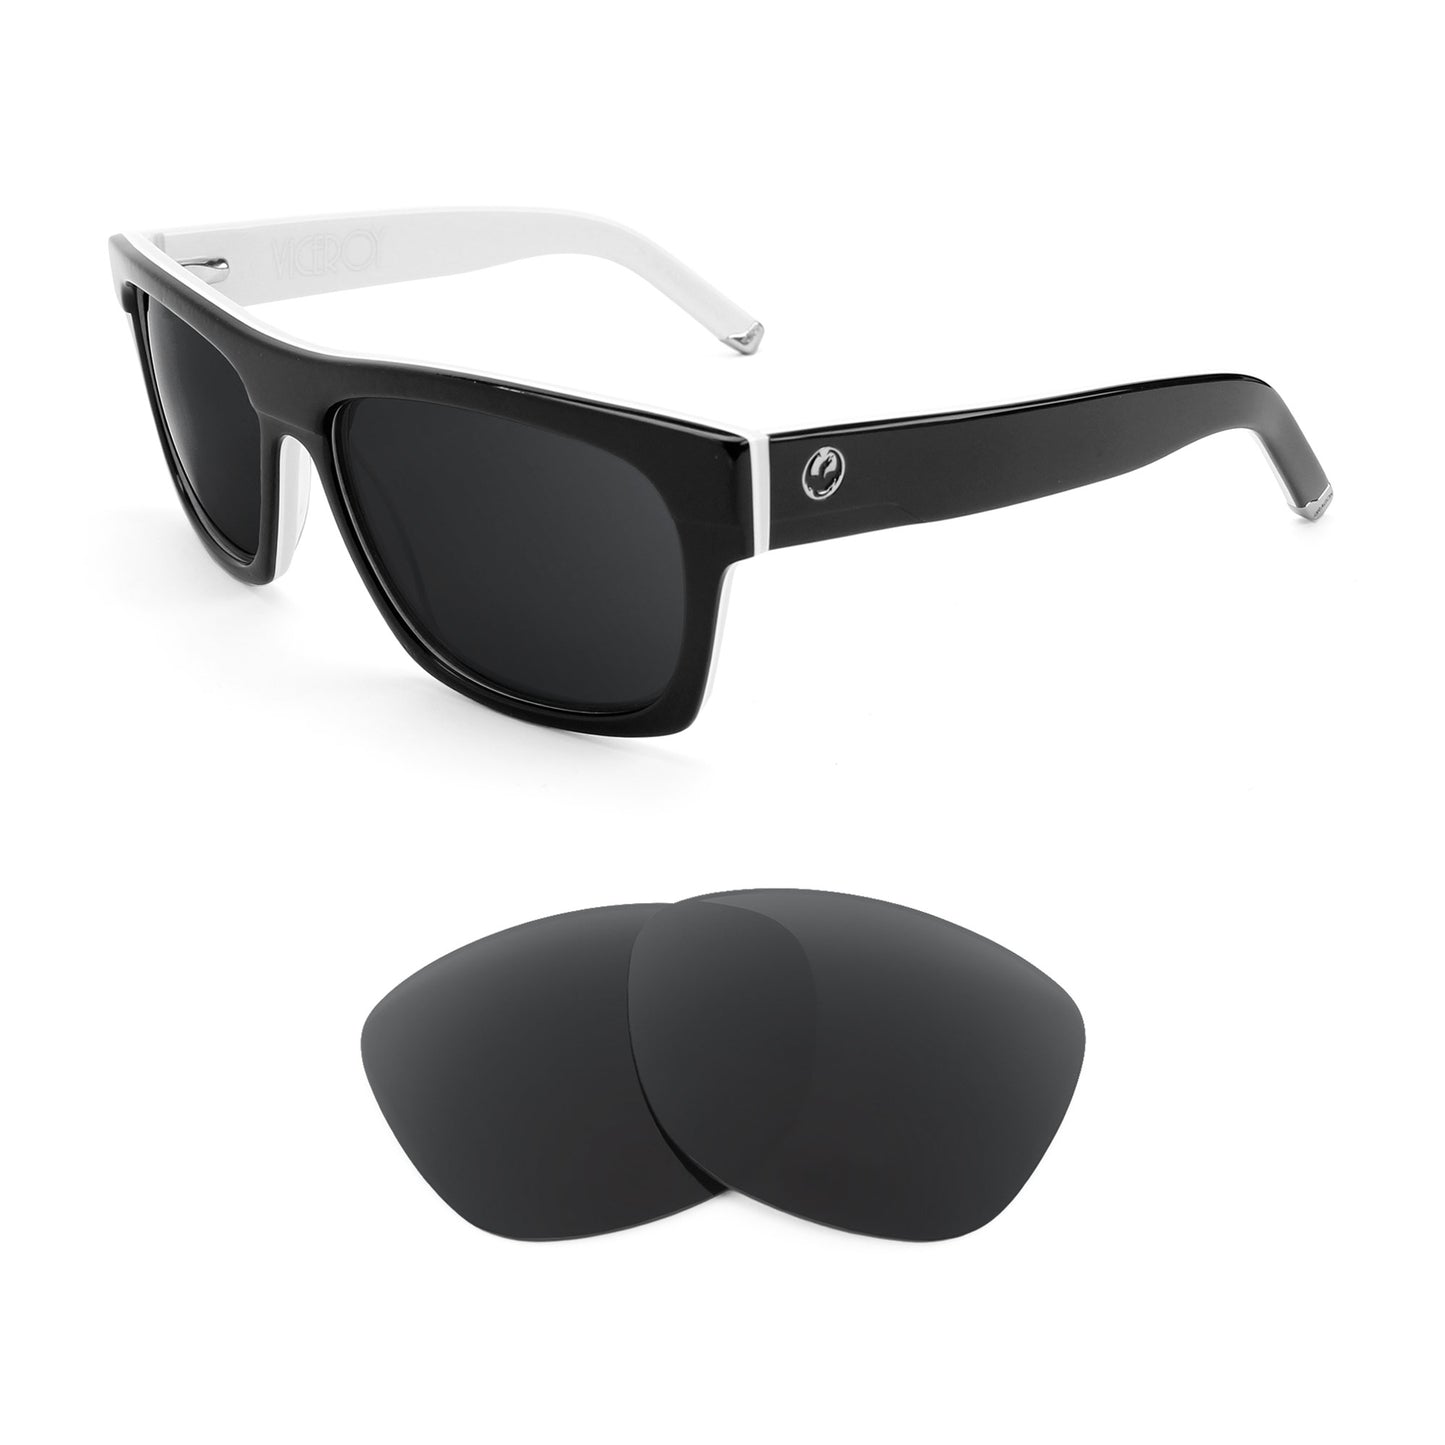 Dragon Viceroy sunglasses with replacement lenses